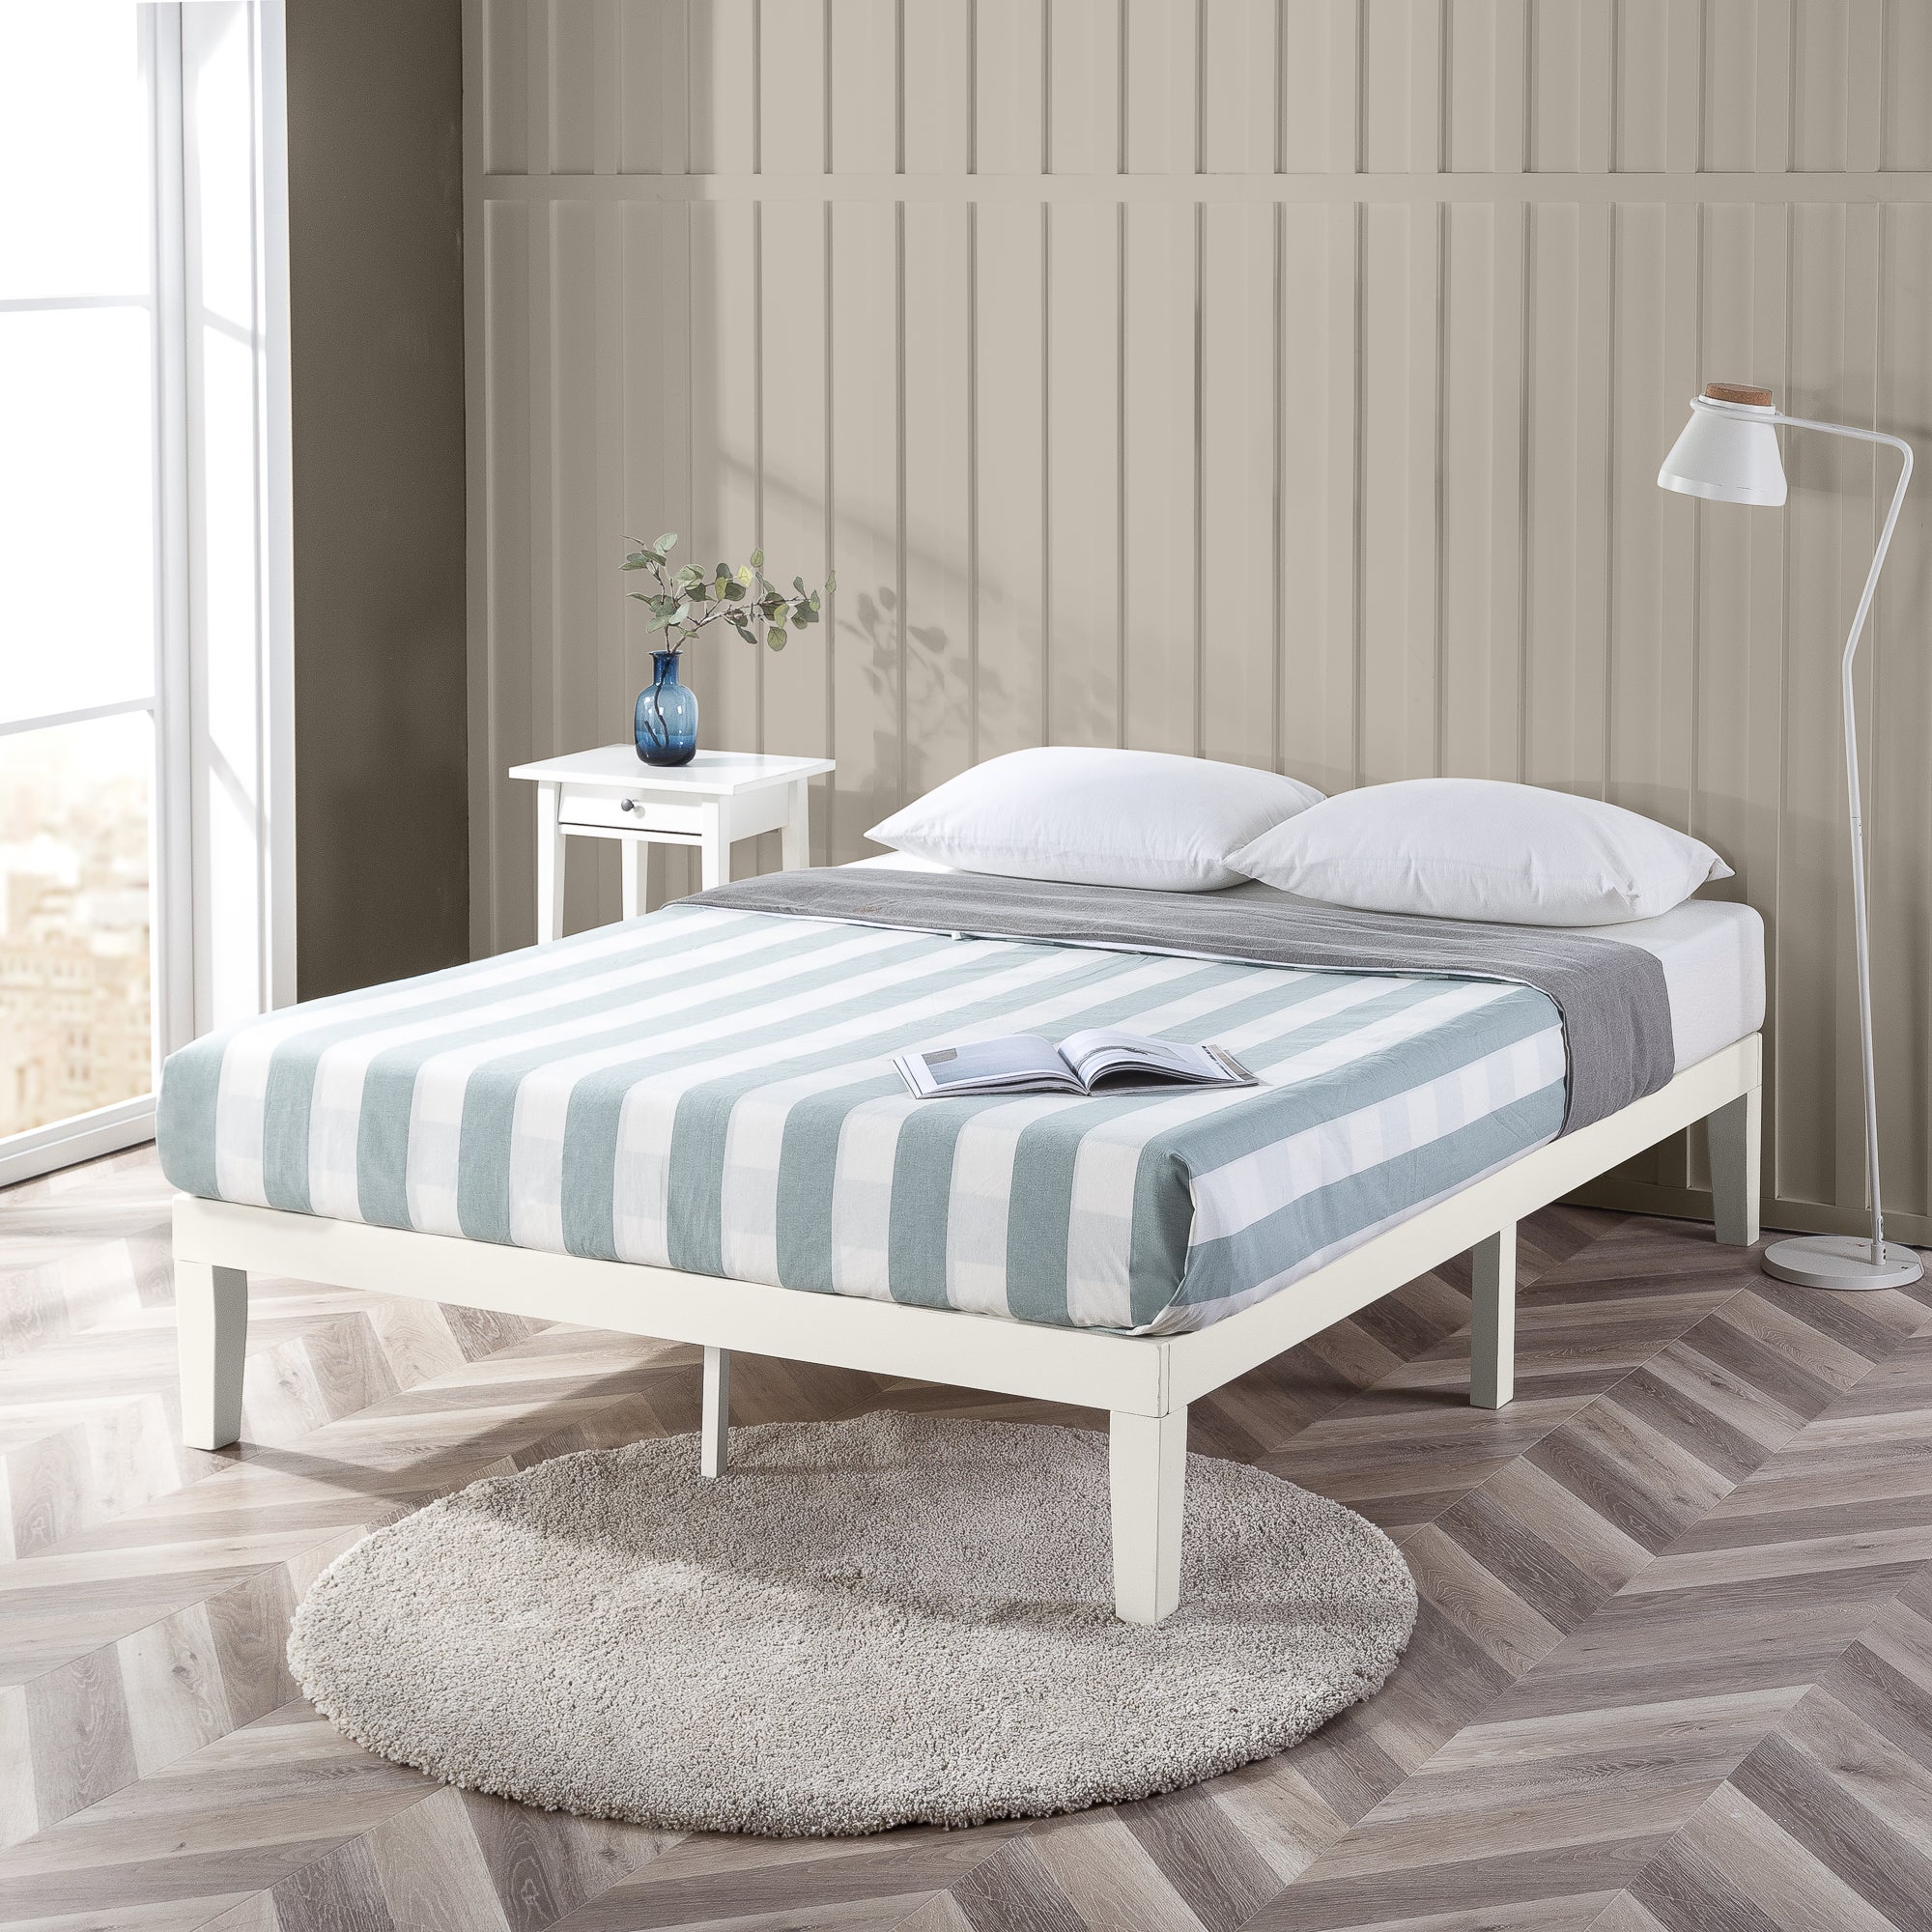 Zinus Moiz White Timber Wood Bed Frame - Double, Queen, King Single